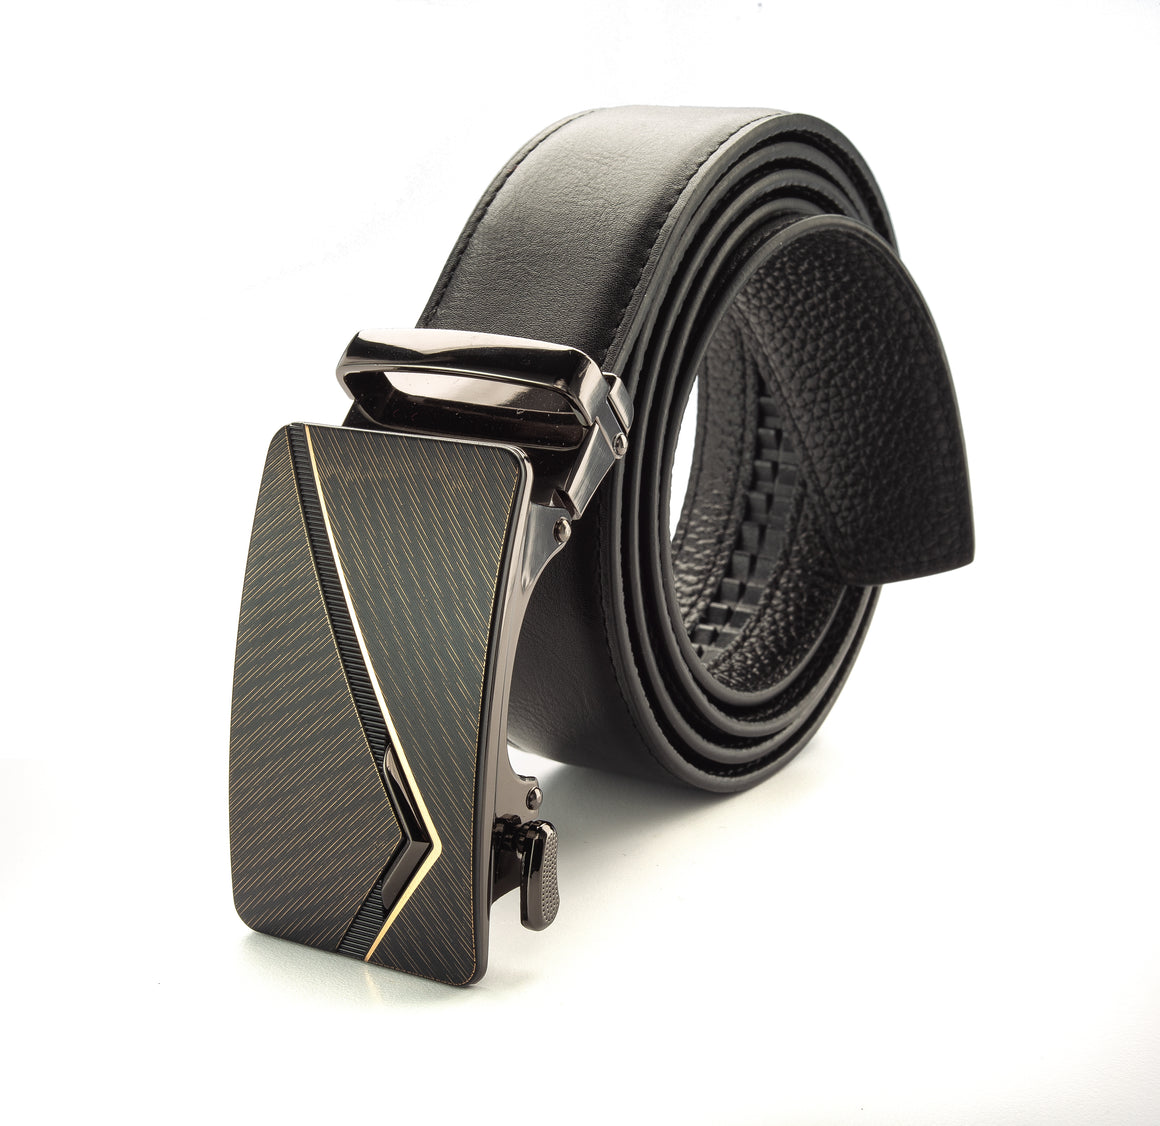 Define Your Style with Royal's High-Quality Men's Leather Track Belts | BELT-25